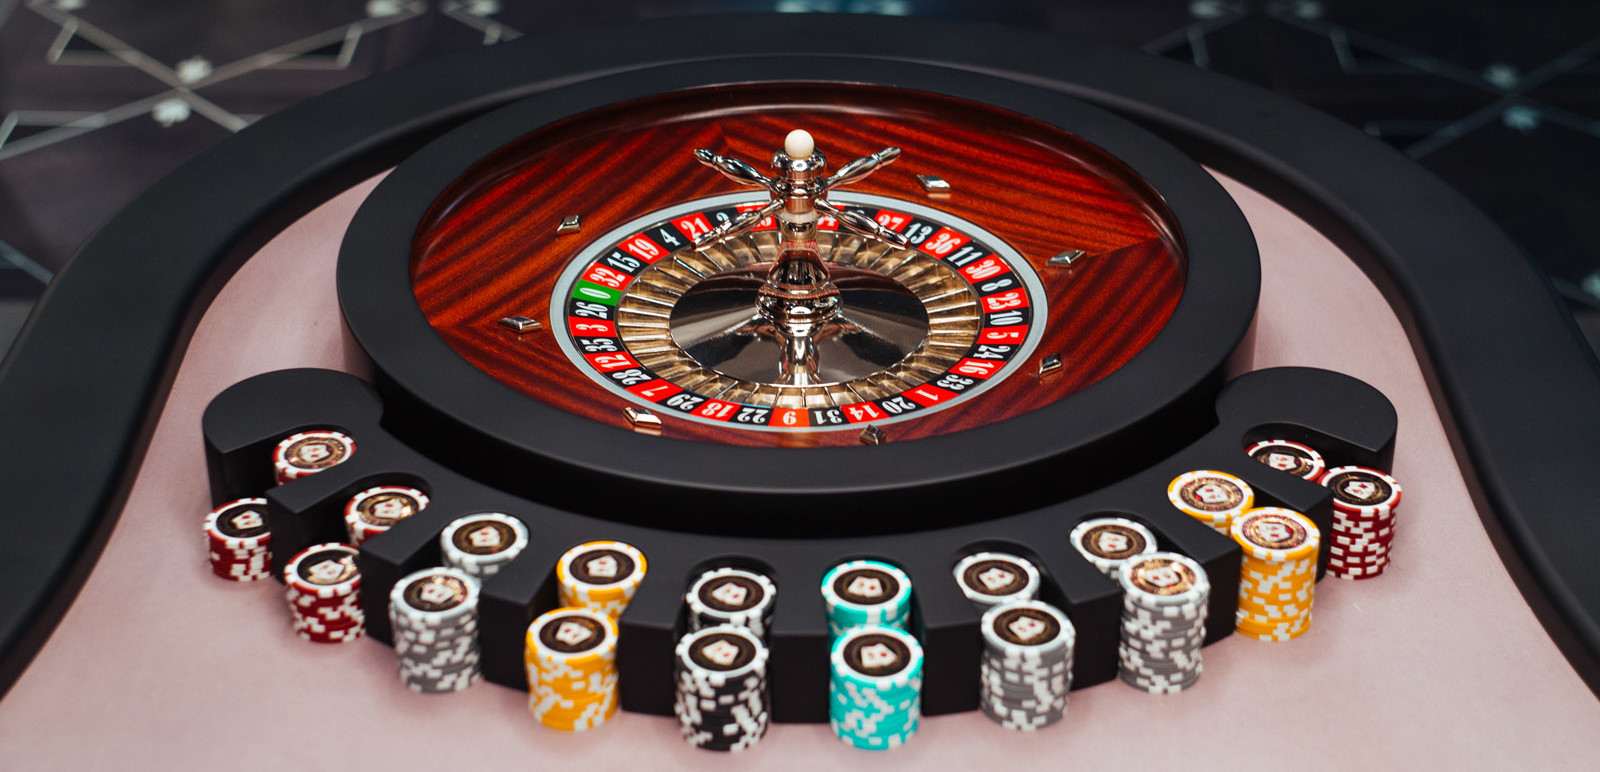 Want to know about the roulette wheel different versions and functions